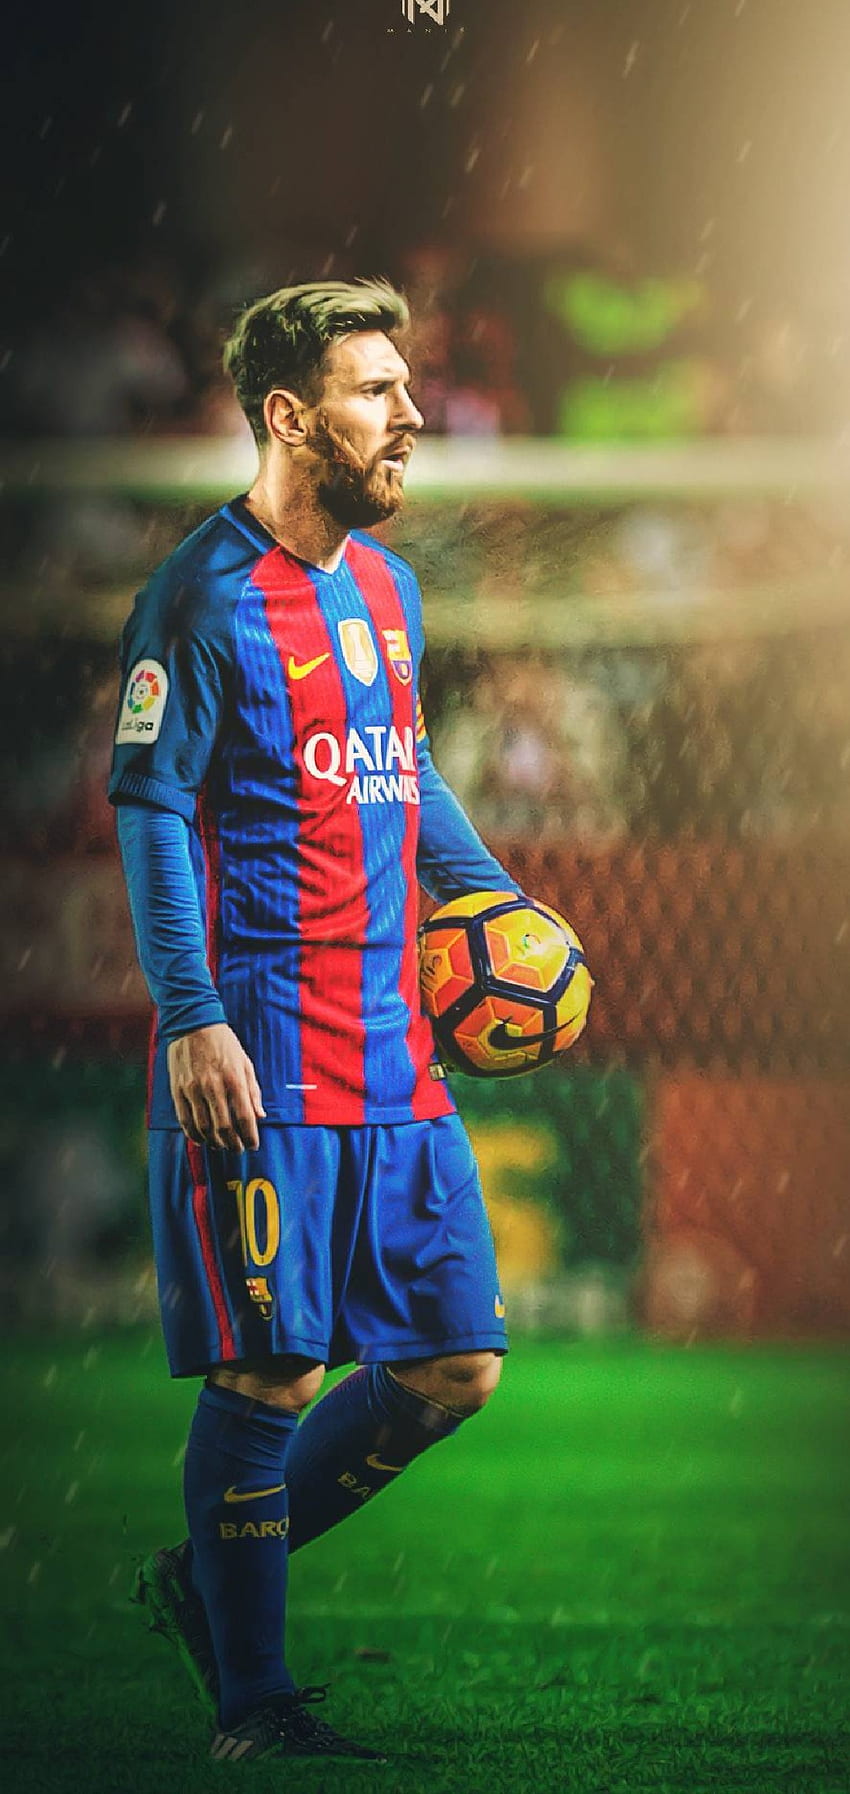 Messi in Football Field iPhone Wallpaper HD  iPhone Wallpapers